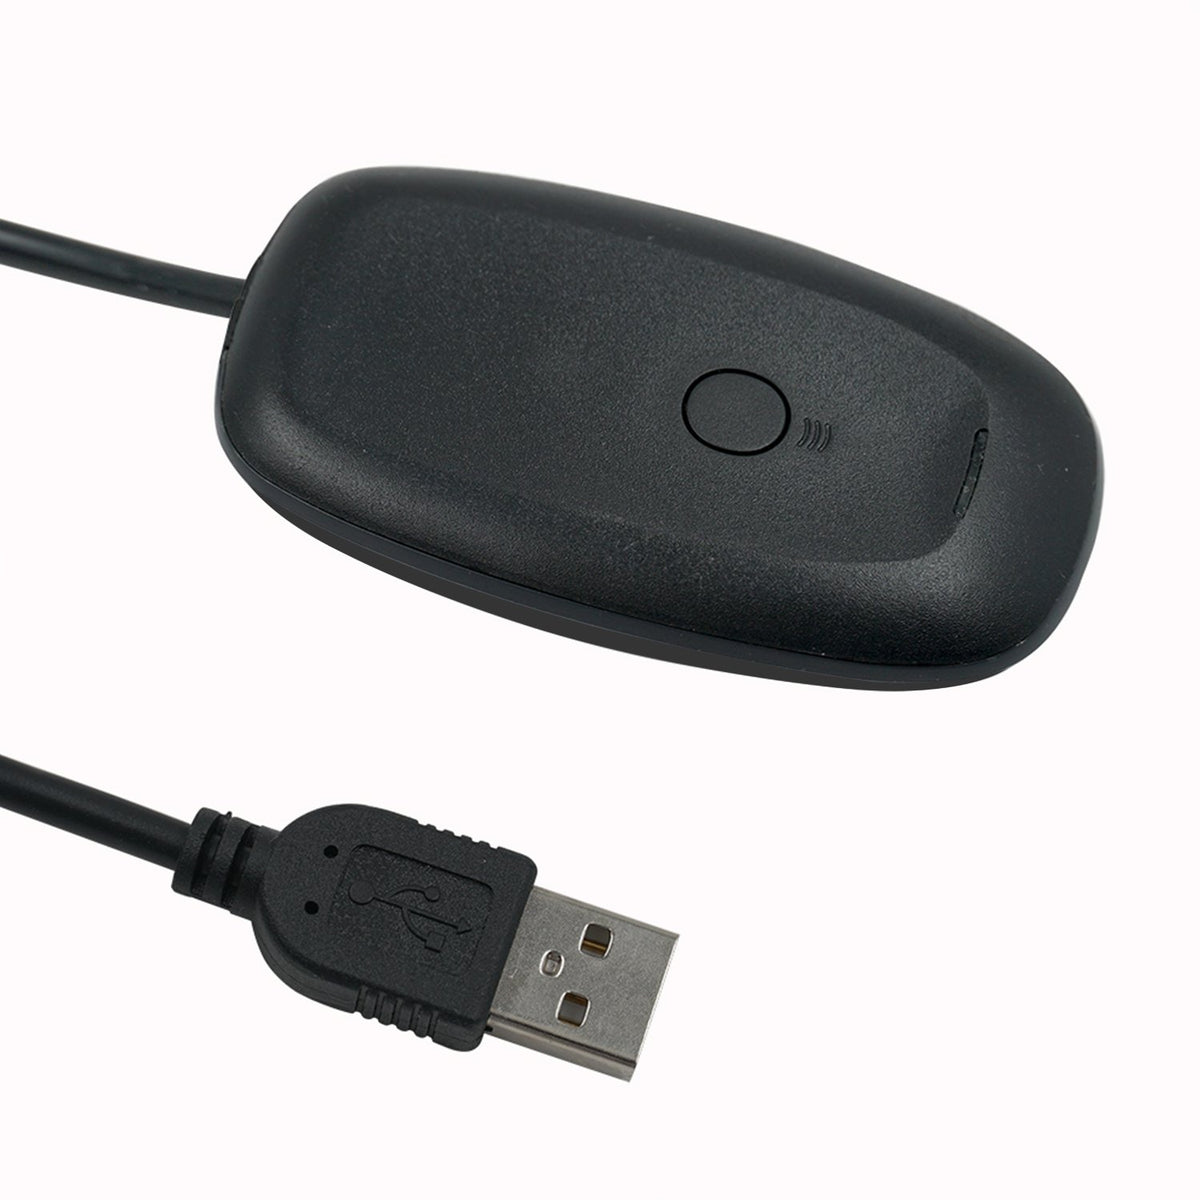 Official Microsoft Xbox 360 Wireless Receiver